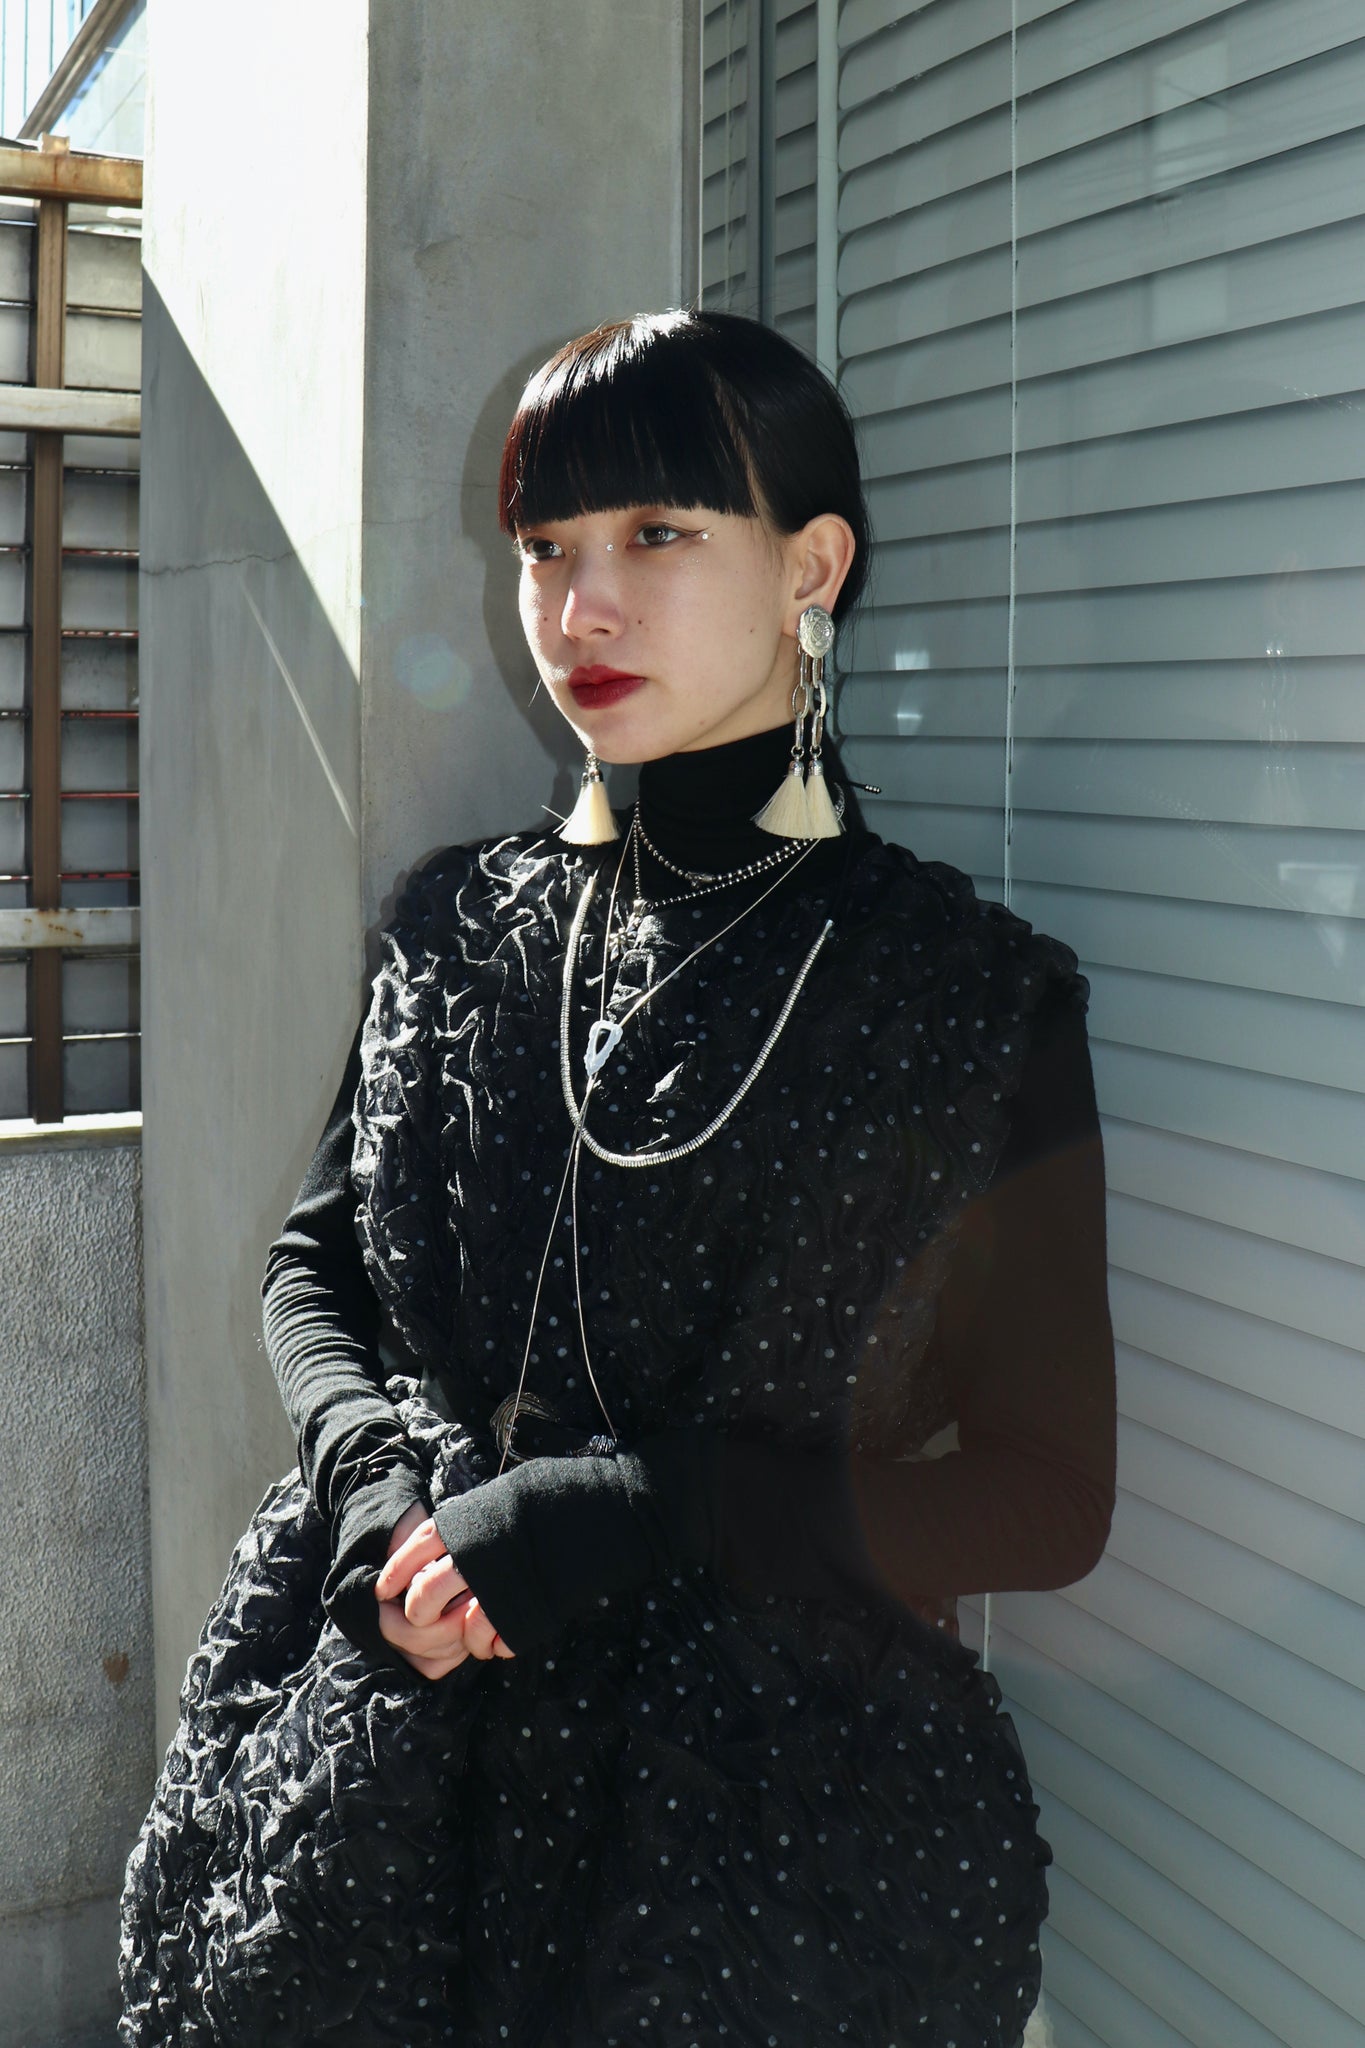 Styling image using TOGA 23ss Chain Fringe Earrings